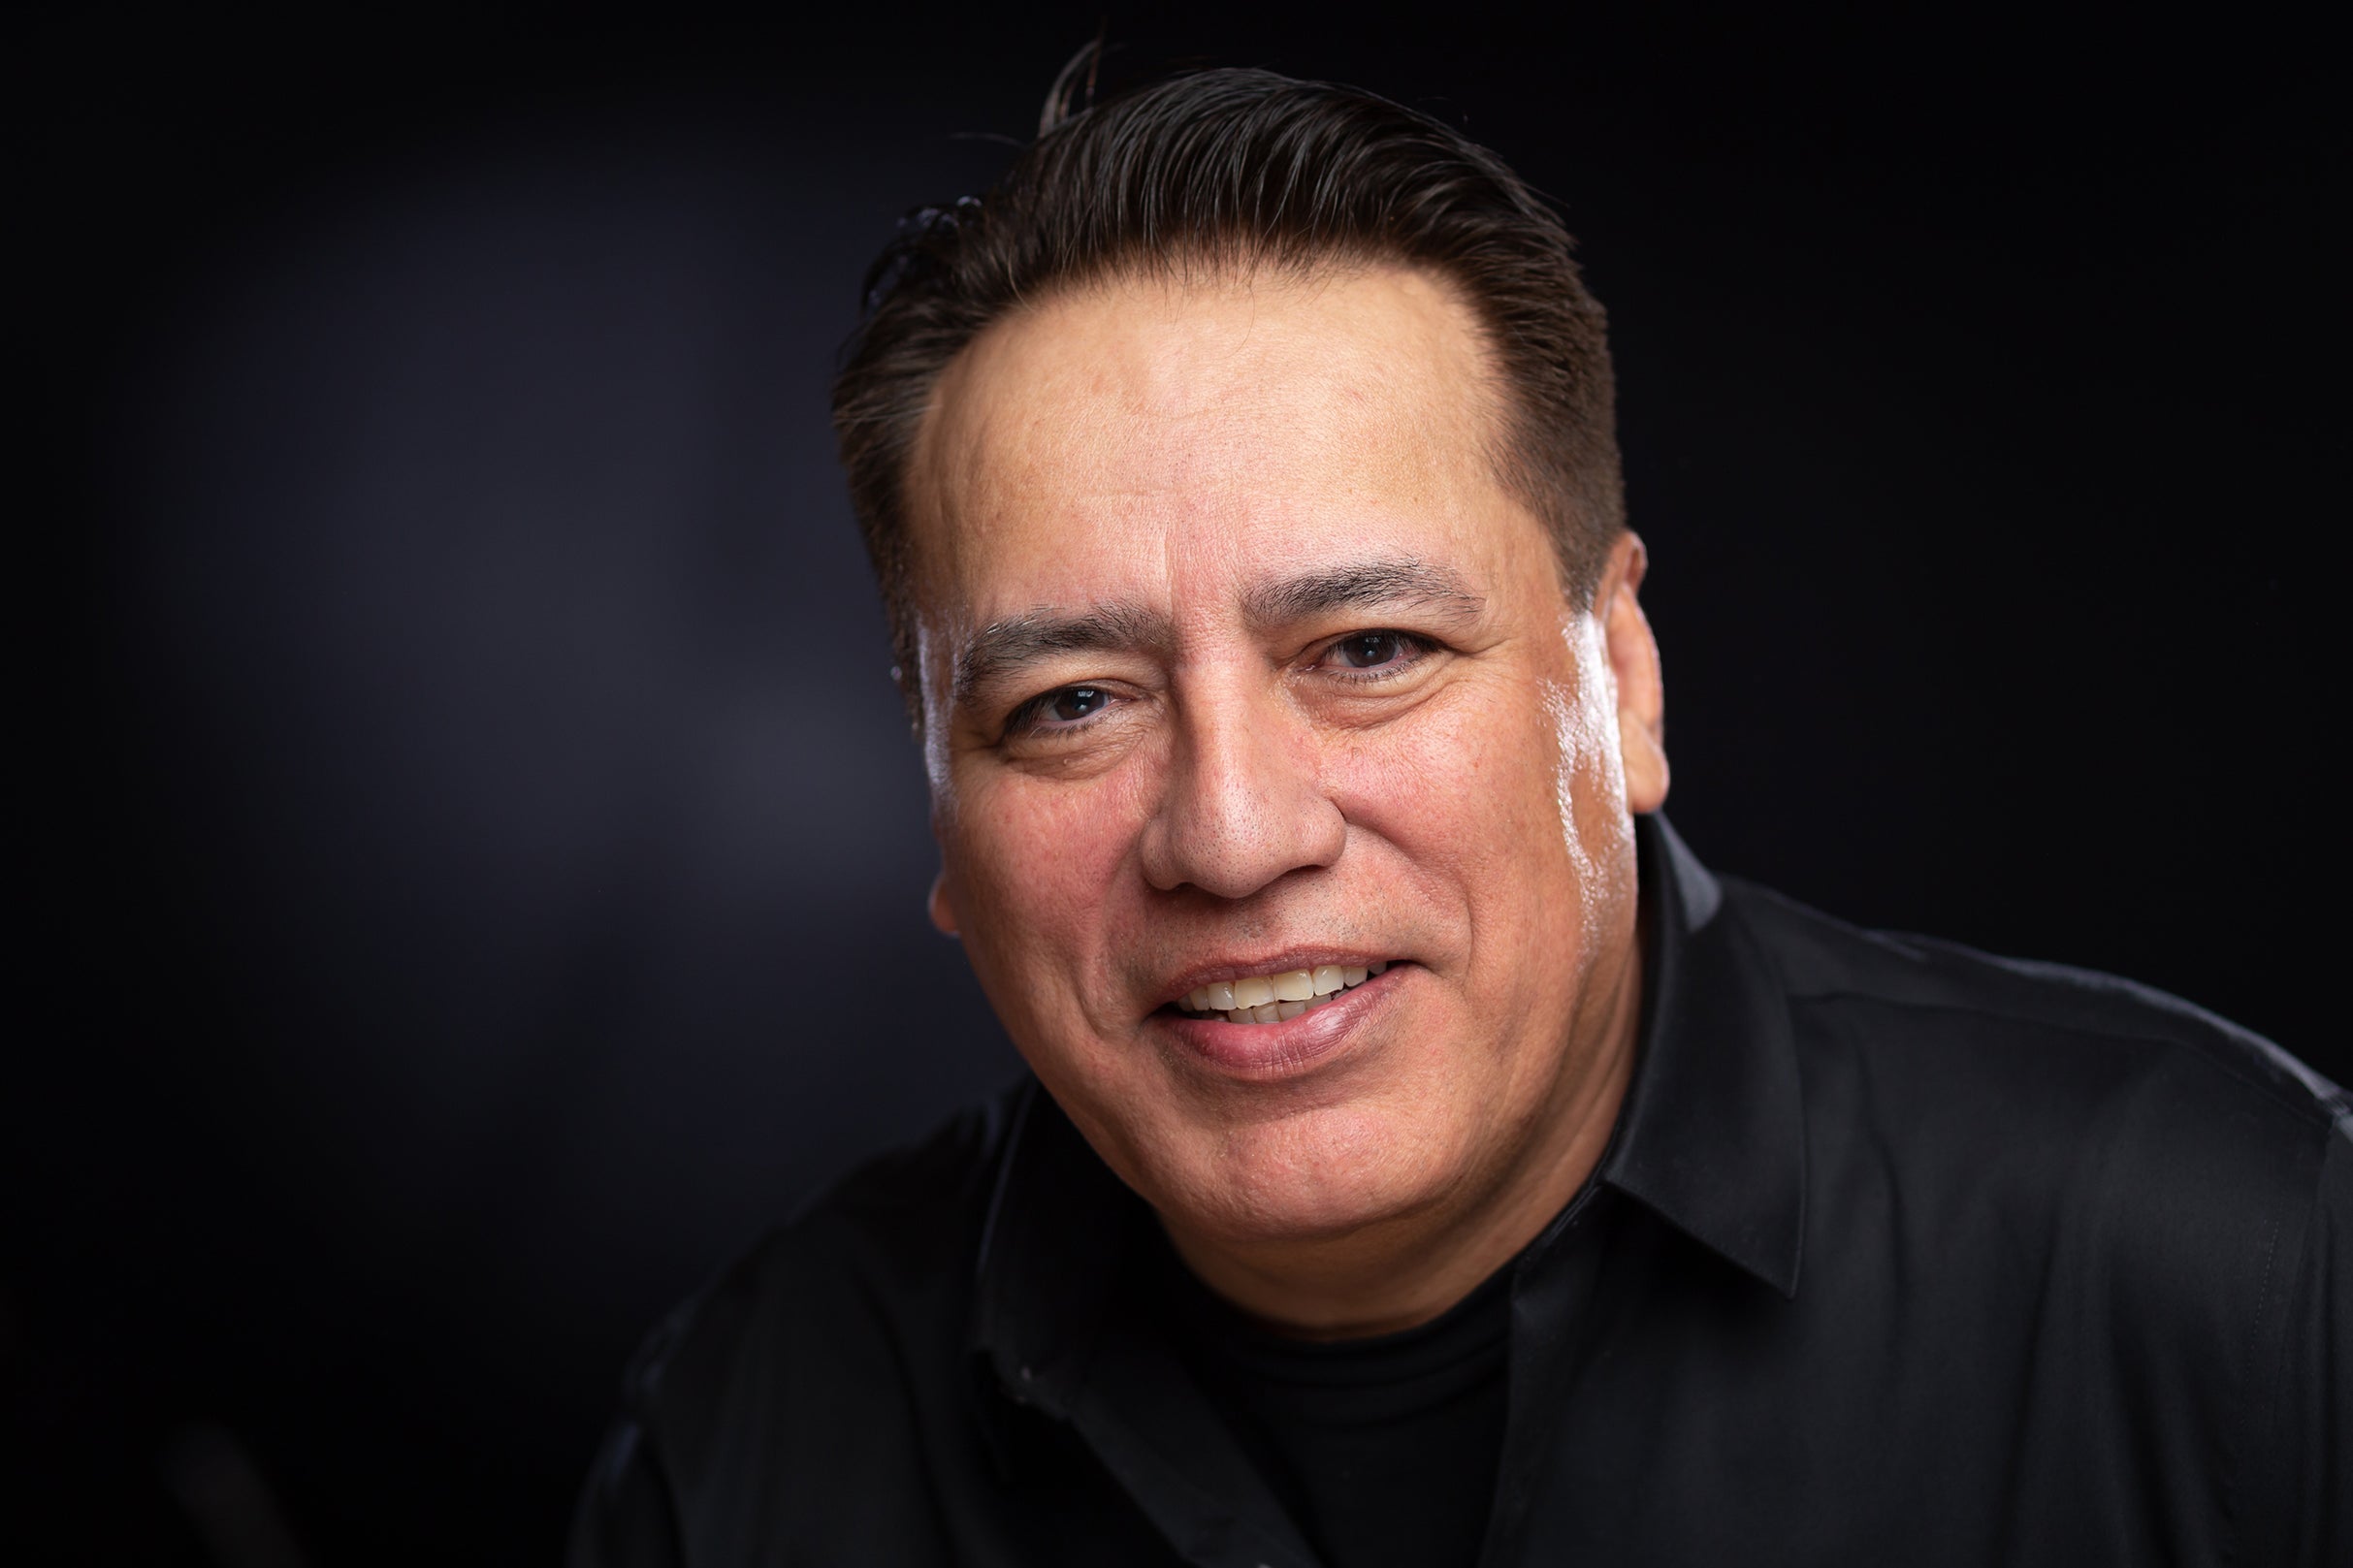 An Evening Of Comedy with Willie Barcena